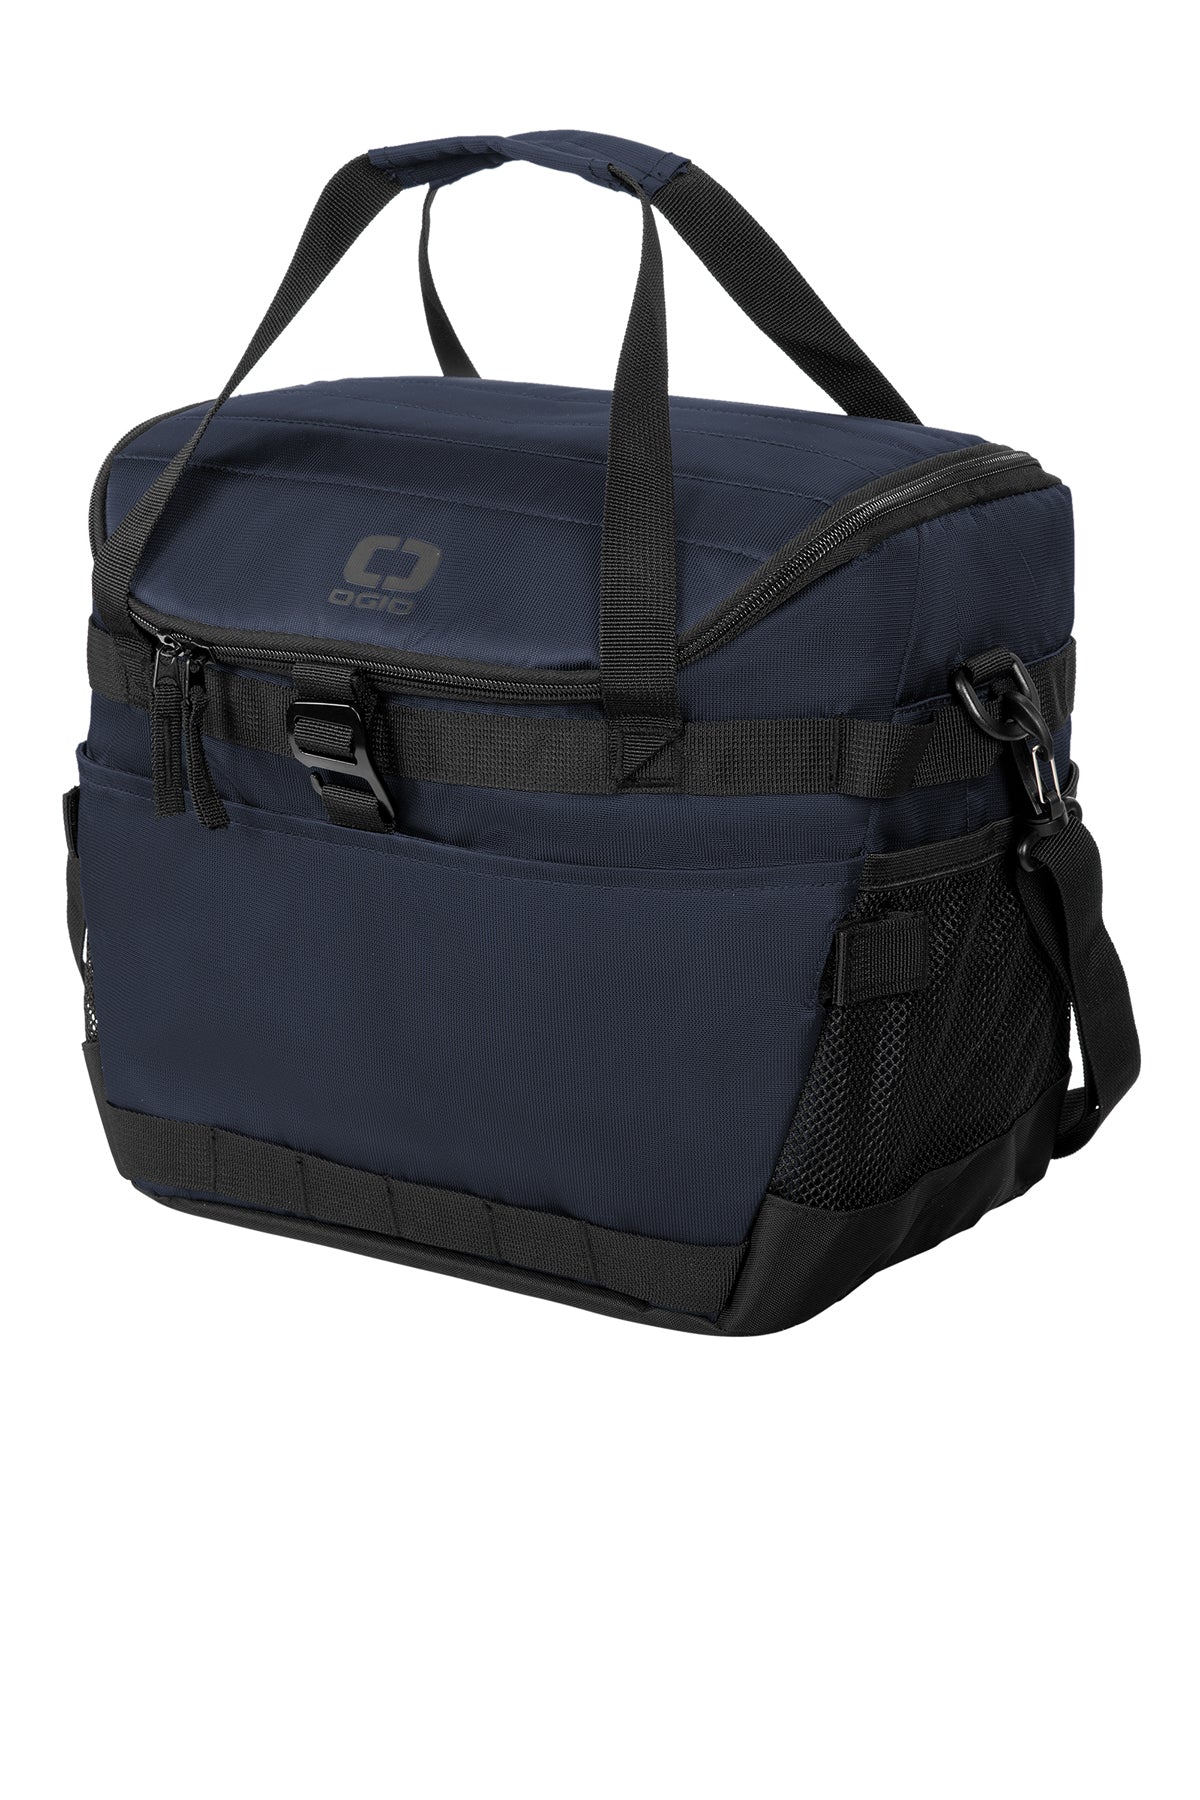 OGIO Sprint 24-Pack Customzied Coolers, River Blue Navy